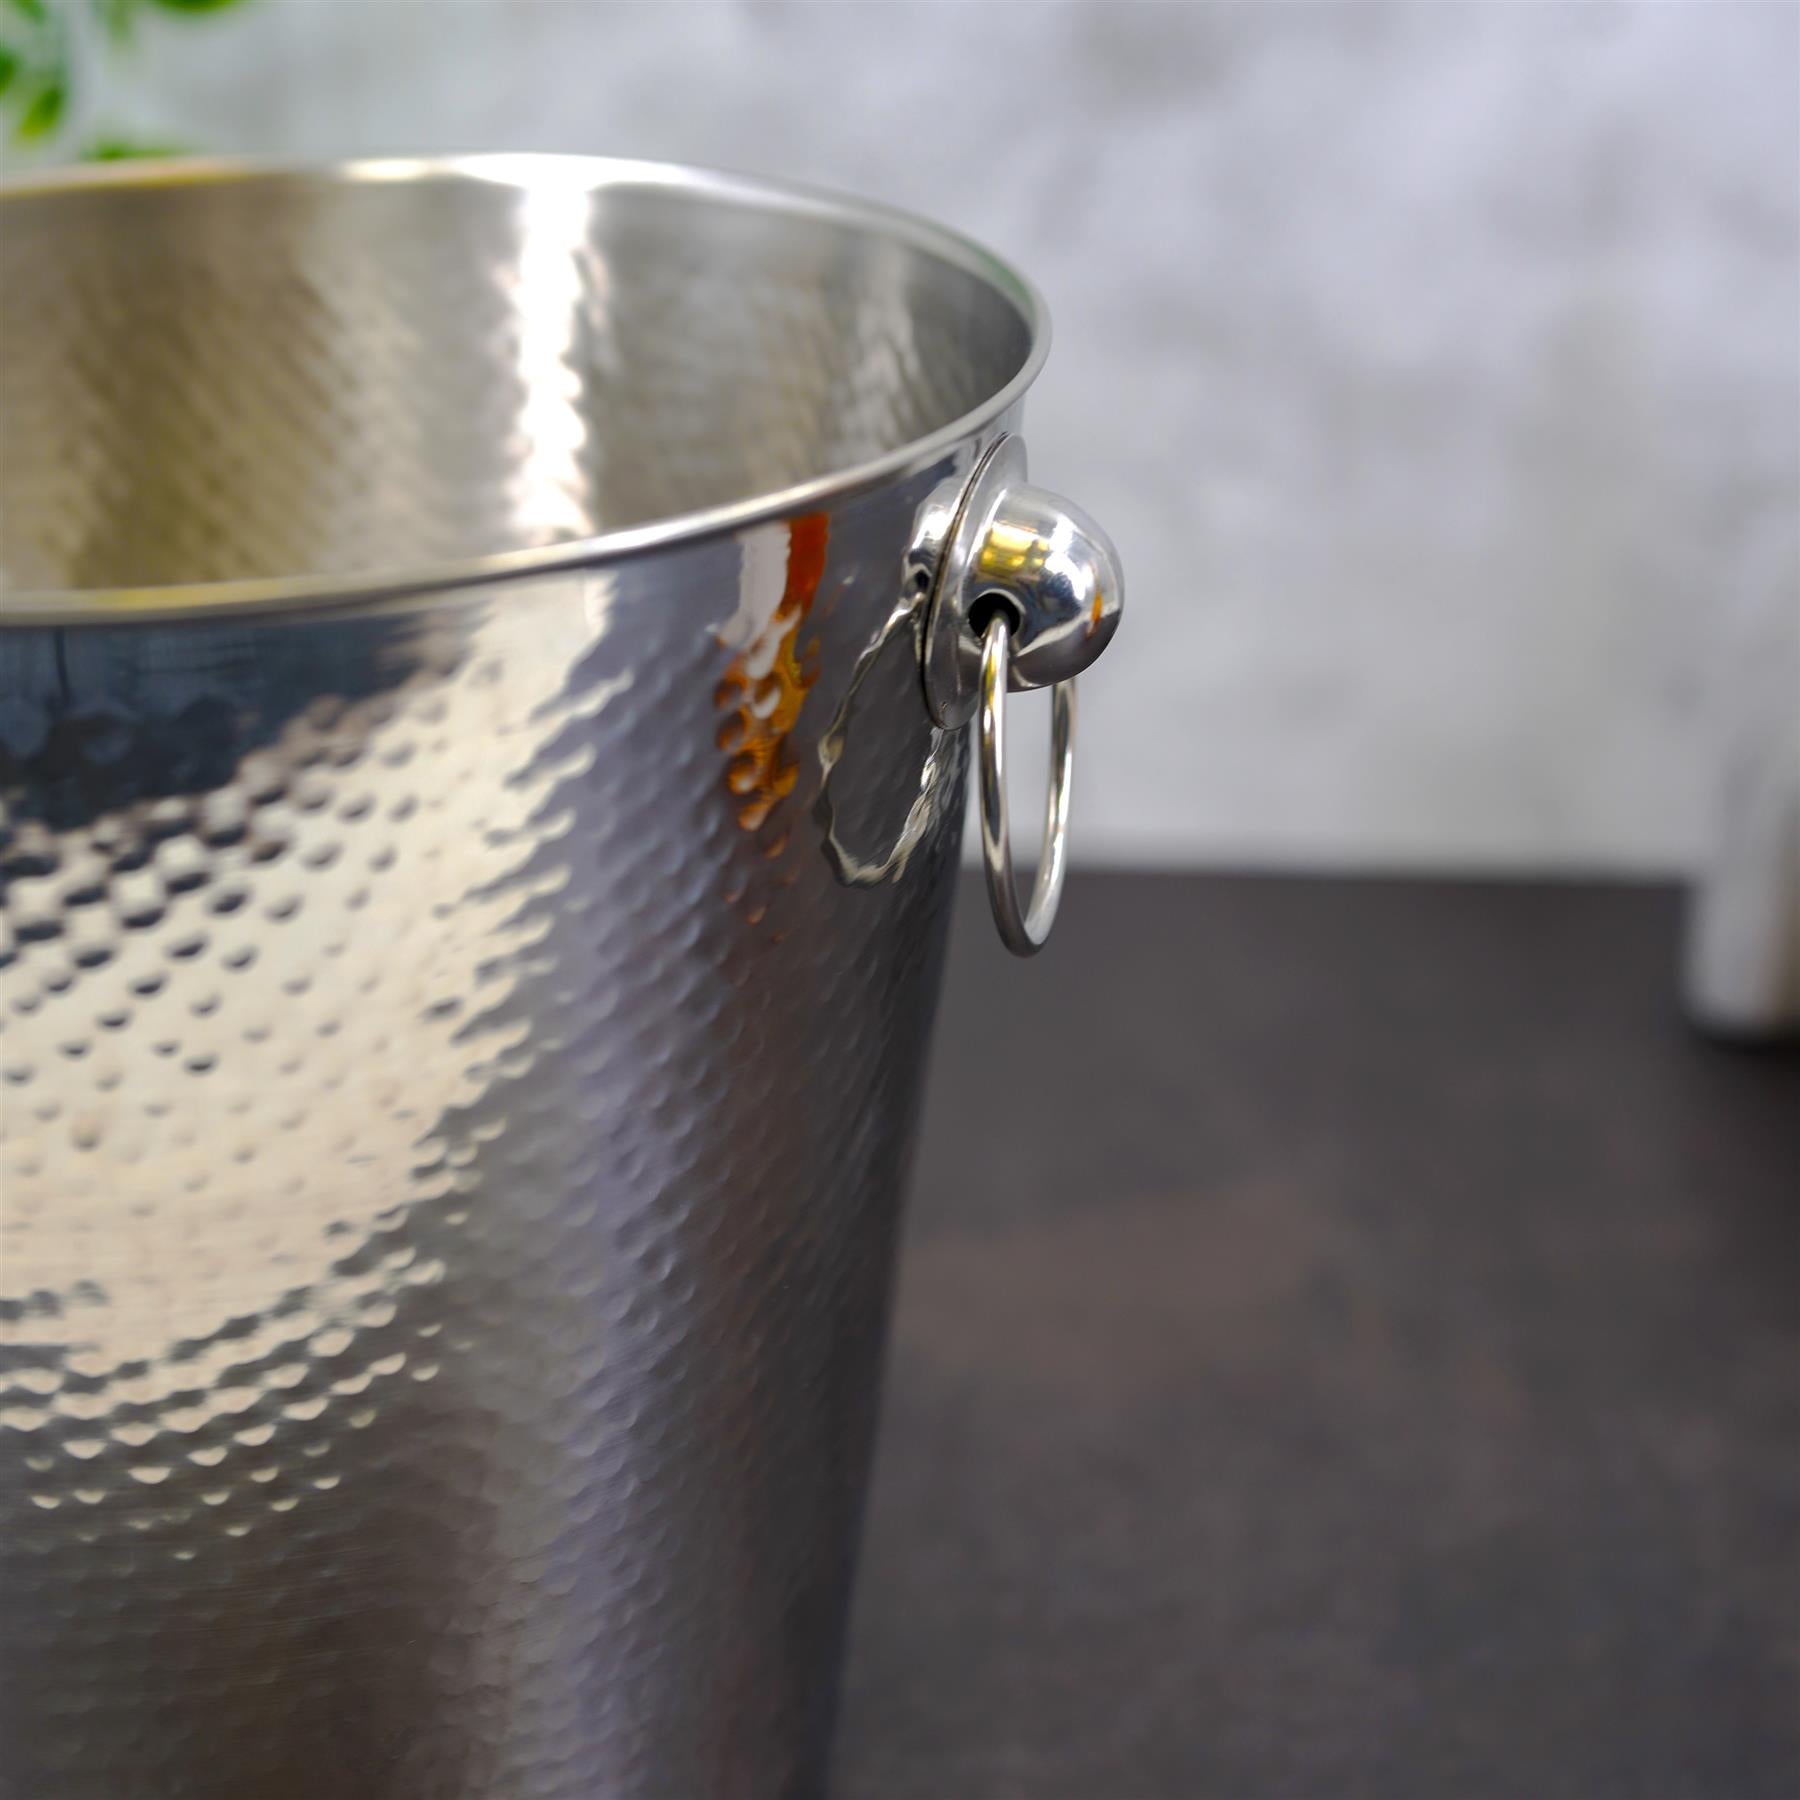 Stainless Steel Ice Bucket Hammered Champagne Drink Wine Cooler With Handles by Geezy - The Magic Toy Shop